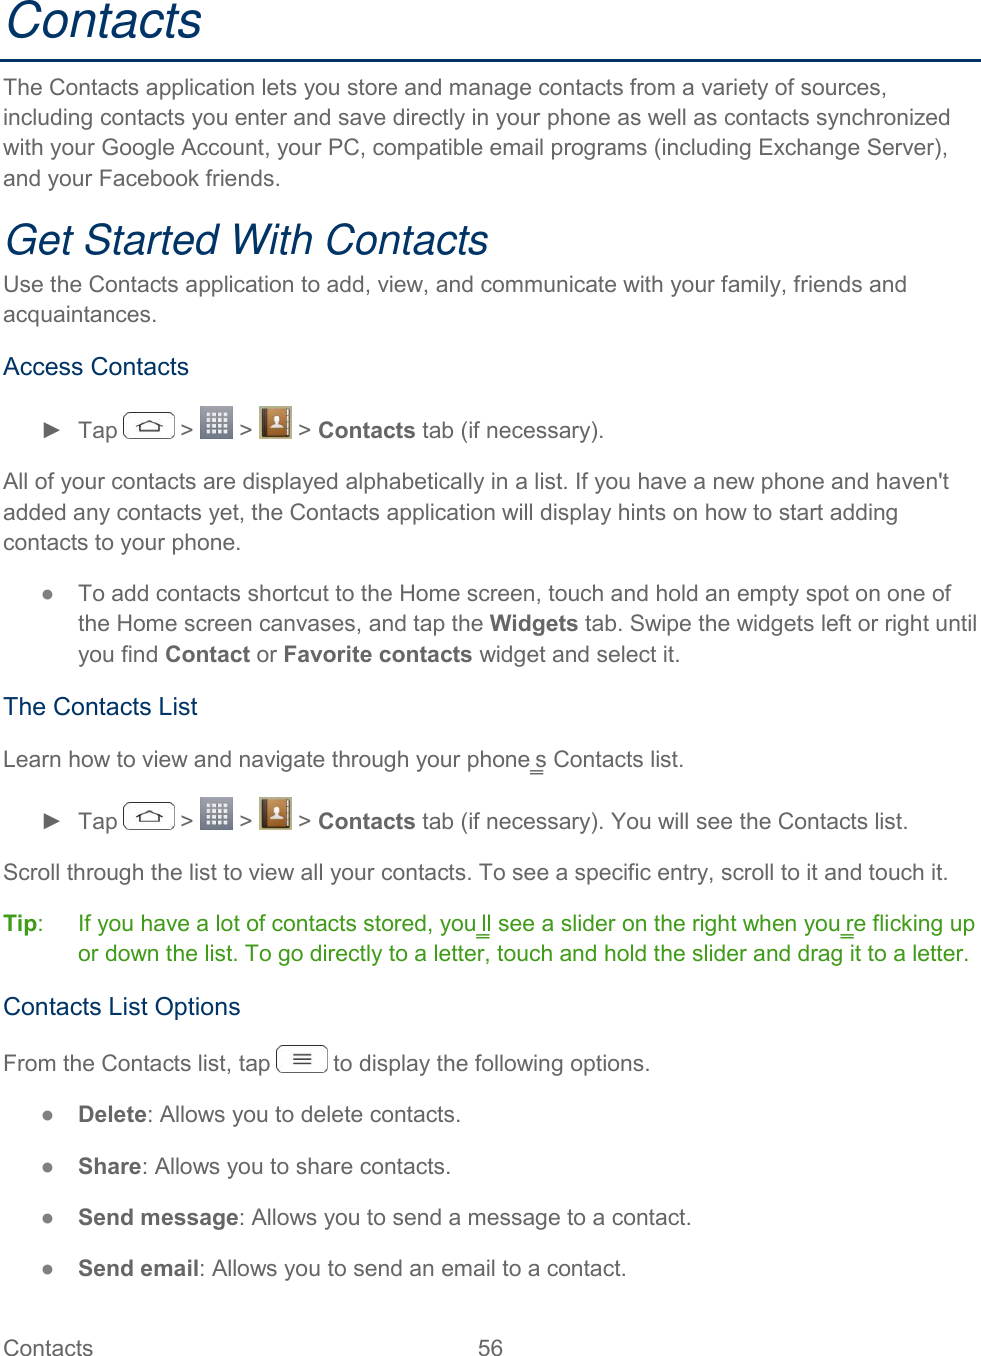  Contacts  56   Contacts The Contacts application lets you store and manage contacts from a variety of sources, including contacts you enter and save directly in your phone as well as contacts synchronized with your Google Account, your PC, compatible email programs (including Exchange Server), and your Facebook friends. Get Started With Contacts Use the Contacts application to add, view, and communicate with your family, friends and acquaintances. Access Contacts ►  Tap   &gt;   &gt;   &gt; Contacts tab (if necessary). All of your contacts are displayed alphabetically in a list. If you have a new phone and haven&apos;t added any contacts yet, the Contacts application will display hints on how to start adding contacts to your phone. ●  To add contacts shortcut to the Home screen, touch and hold an empty spot on one of the Home screen canvases, and tap the Widgets tab. Swipe the widgets left or right until you find Contact or Favorite contacts widget and select it. The Contacts List Learn how to view and navigate through your phone‗s Contacts list. ►  Tap   &gt;   &gt;   &gt; Contacts tab (if necessary). You will see the Contacts list. Scroll through the list to view all your contacts. To see a specific entry, scroll to it and touch it. Tip:   If you have a lot of contacts stored, you‗ll see a slider on the right when you‗re flicking up or down the list. To go directly to a letter, touch and hold the slider and drag it to a letter. Contacts List Options From the Contacts list, tap   to display the following options. ●  Delete: Allows you to delete contacts. ●  Share: Allows you to share contacts. ●  Send message: Allows you to send a message to a contact. ●  Send email: Allows you to send an email to a contact. 